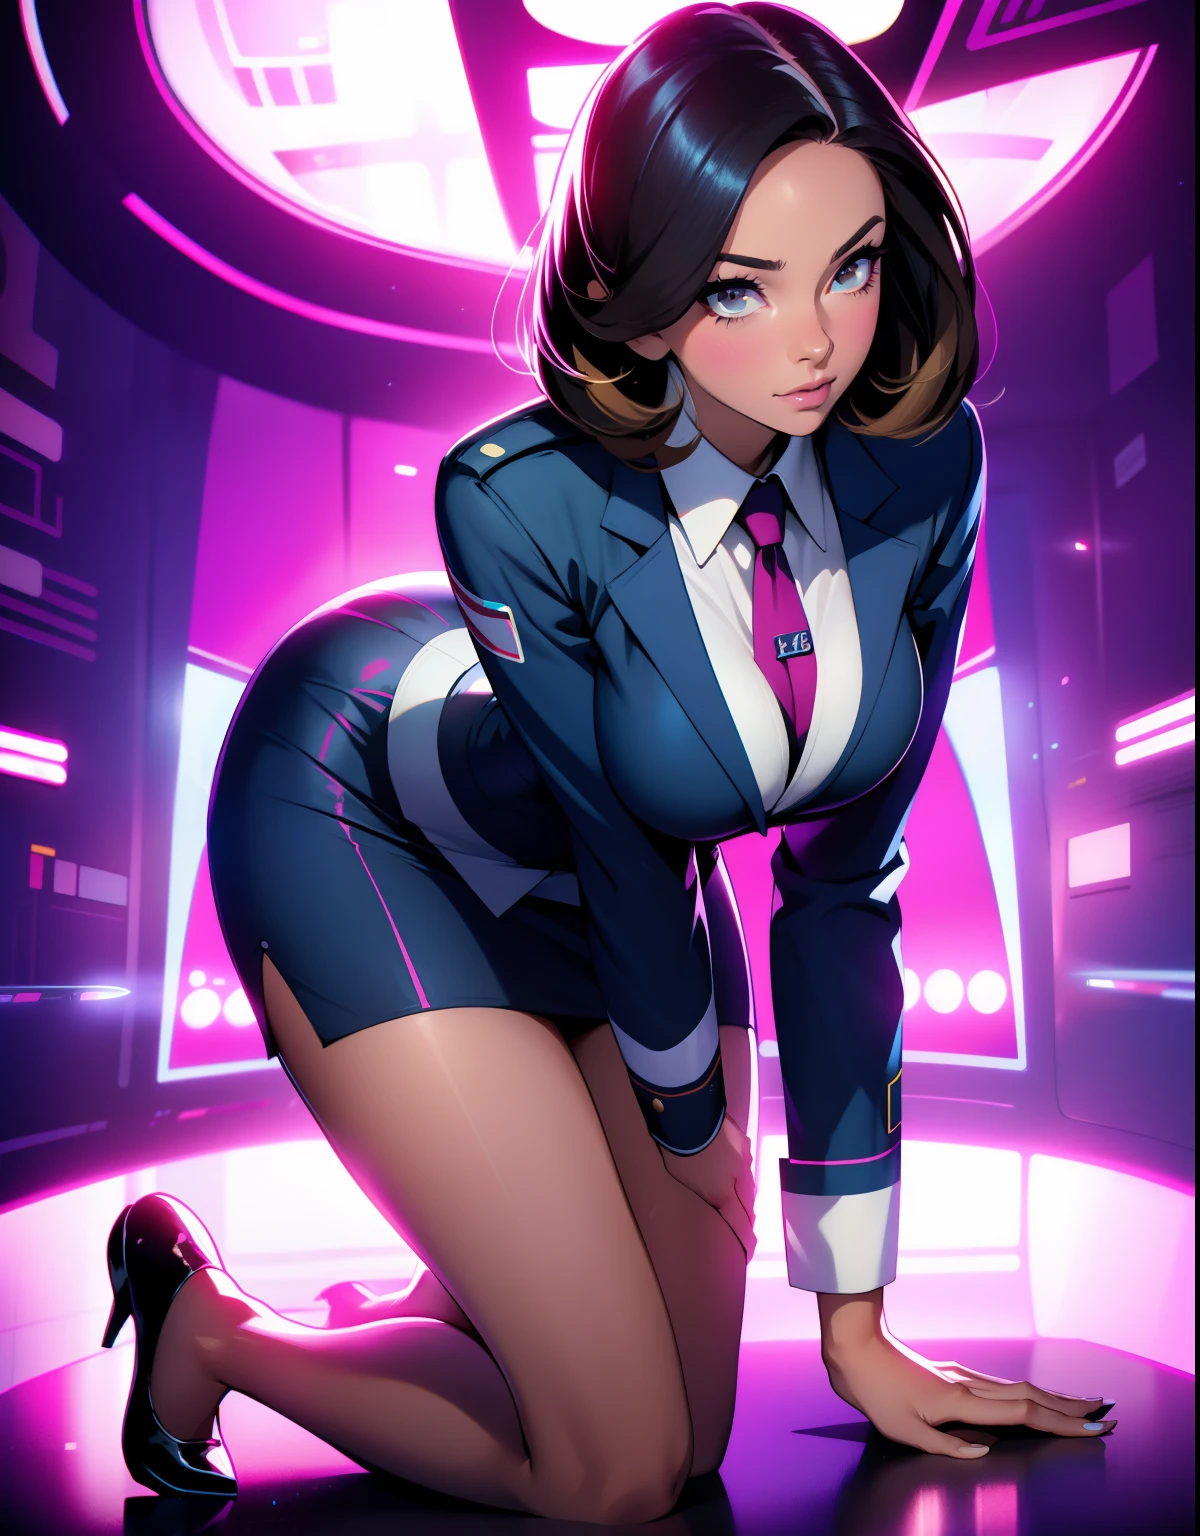 stewardess，Wear a flight attendant suit，A beautiful full body girl，with fair skin，cabelos preto e longos，24 years of age，busty figure，Short clothes，short  skirt，Super sexy scene，synthwave neon color uniform, tight uniform, facial closeups，perfect hands, perfect eyes, kneeling